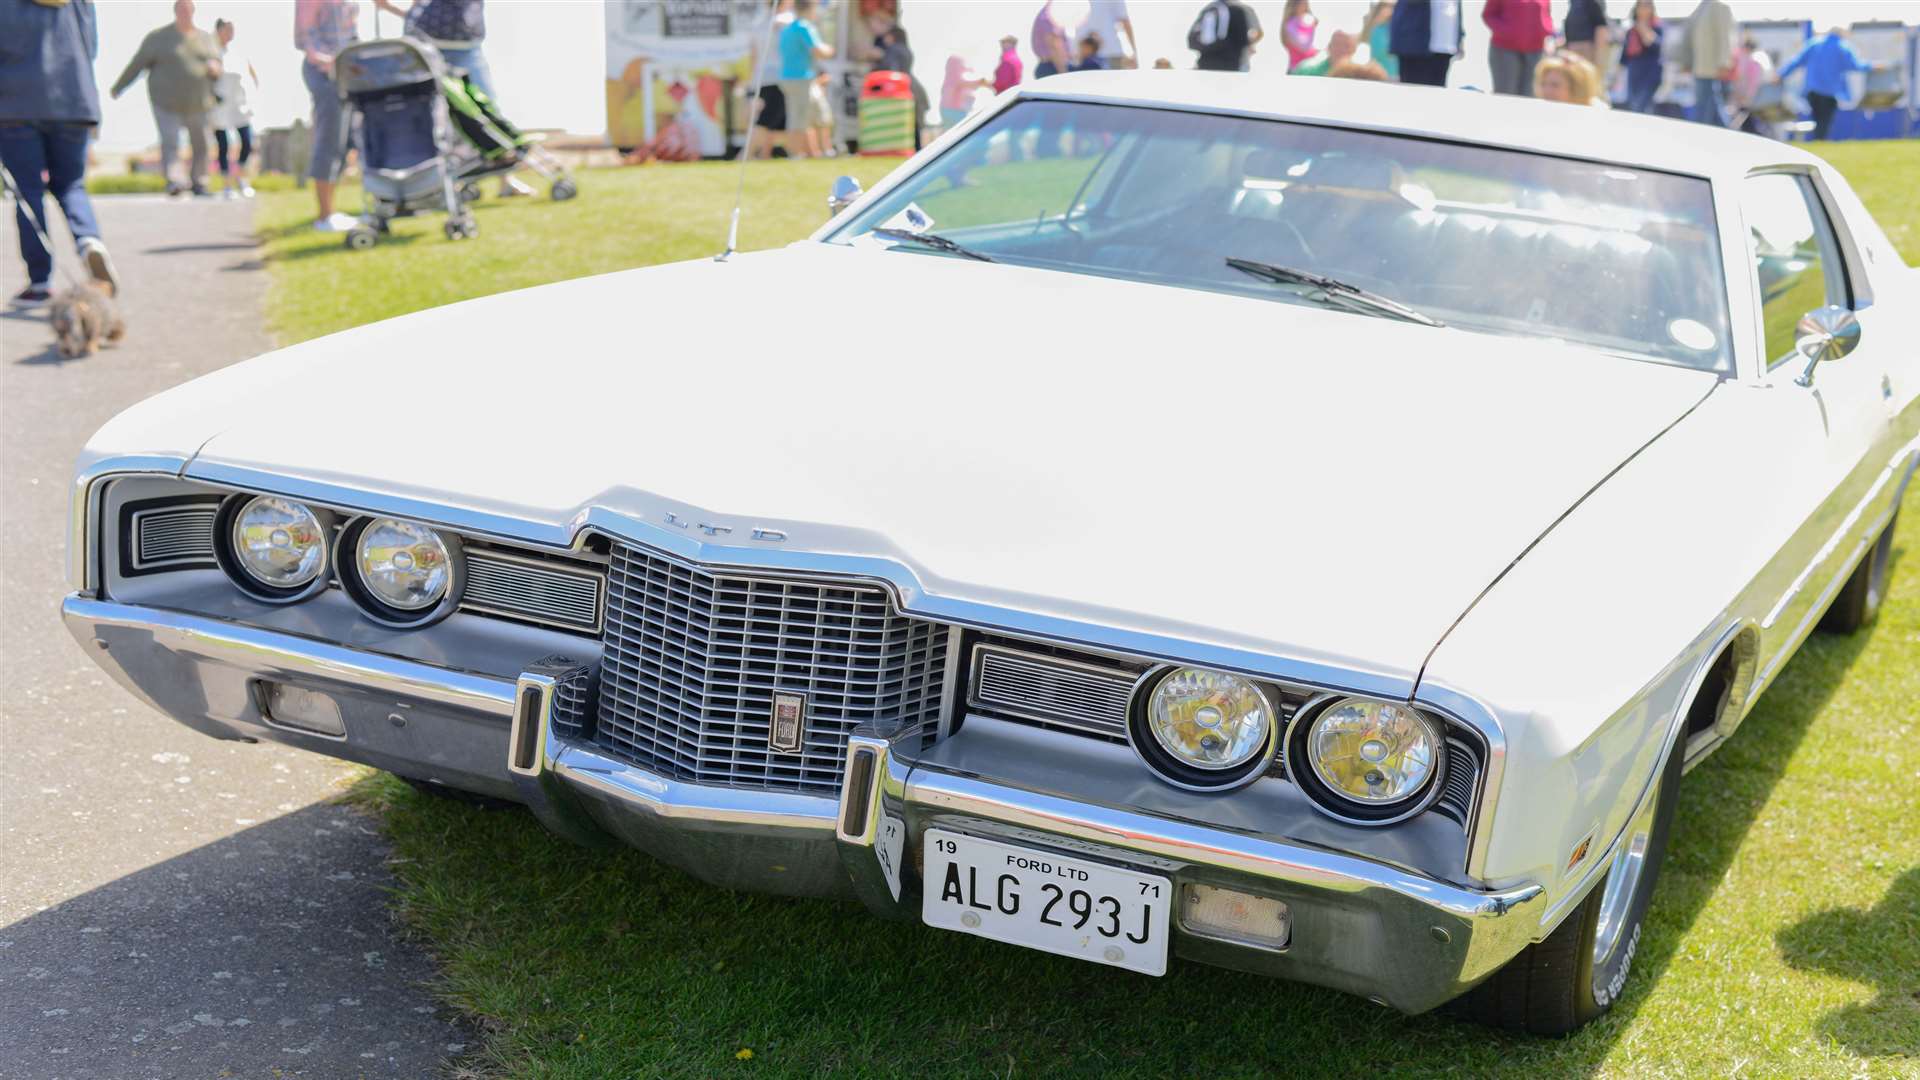 There will be something to suit all tastes at the classic car show in Walmer